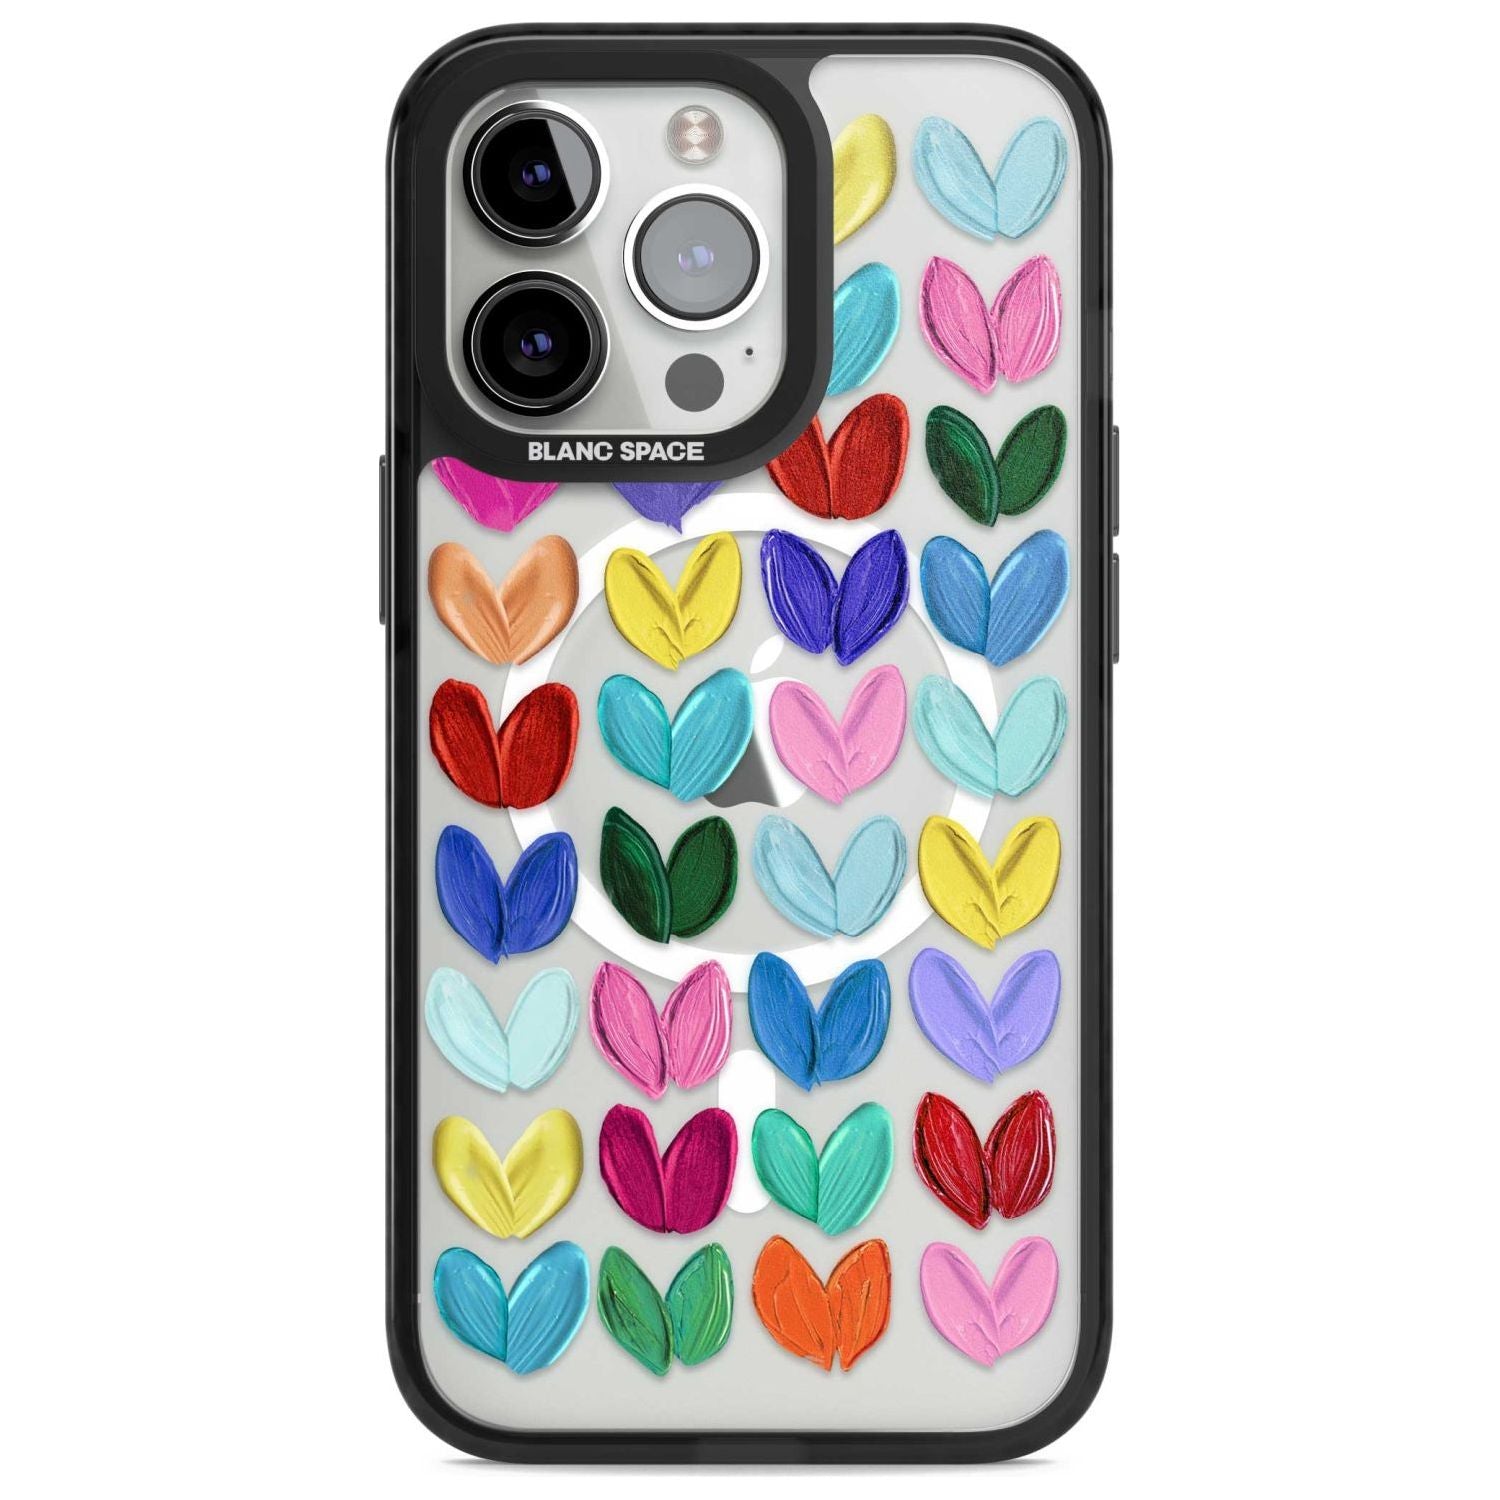 Oil Painted Hearts Phone Case iPhone 15 Pro Max / Magsafe Black Impact Case,iPhone 15 Pro / Magsafe Black Impact Case,iPhone 14 Pro Max / Magsafe Black Impact Case,iPhone 14 Pro / Magsafe Black Impact Case,iPhone 13 Pro / Magsafe Black Impact Case Blanc Space